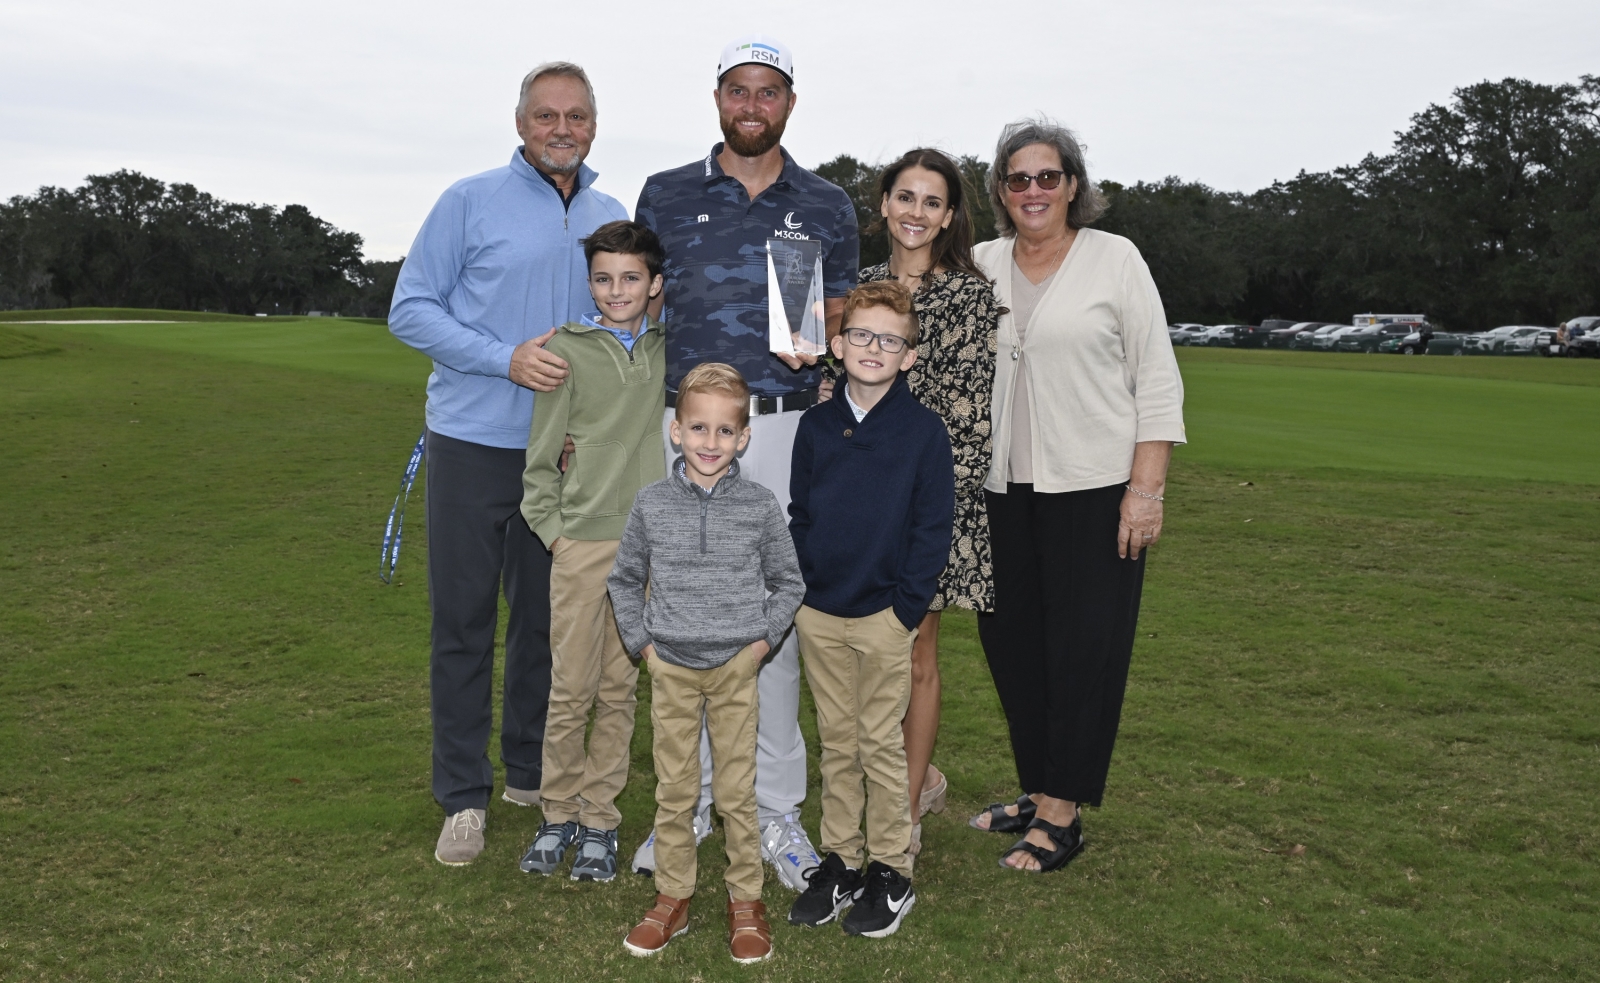 Chris Kirk with his family and the PGA TOUR Courage Award1. Credit Getty Images